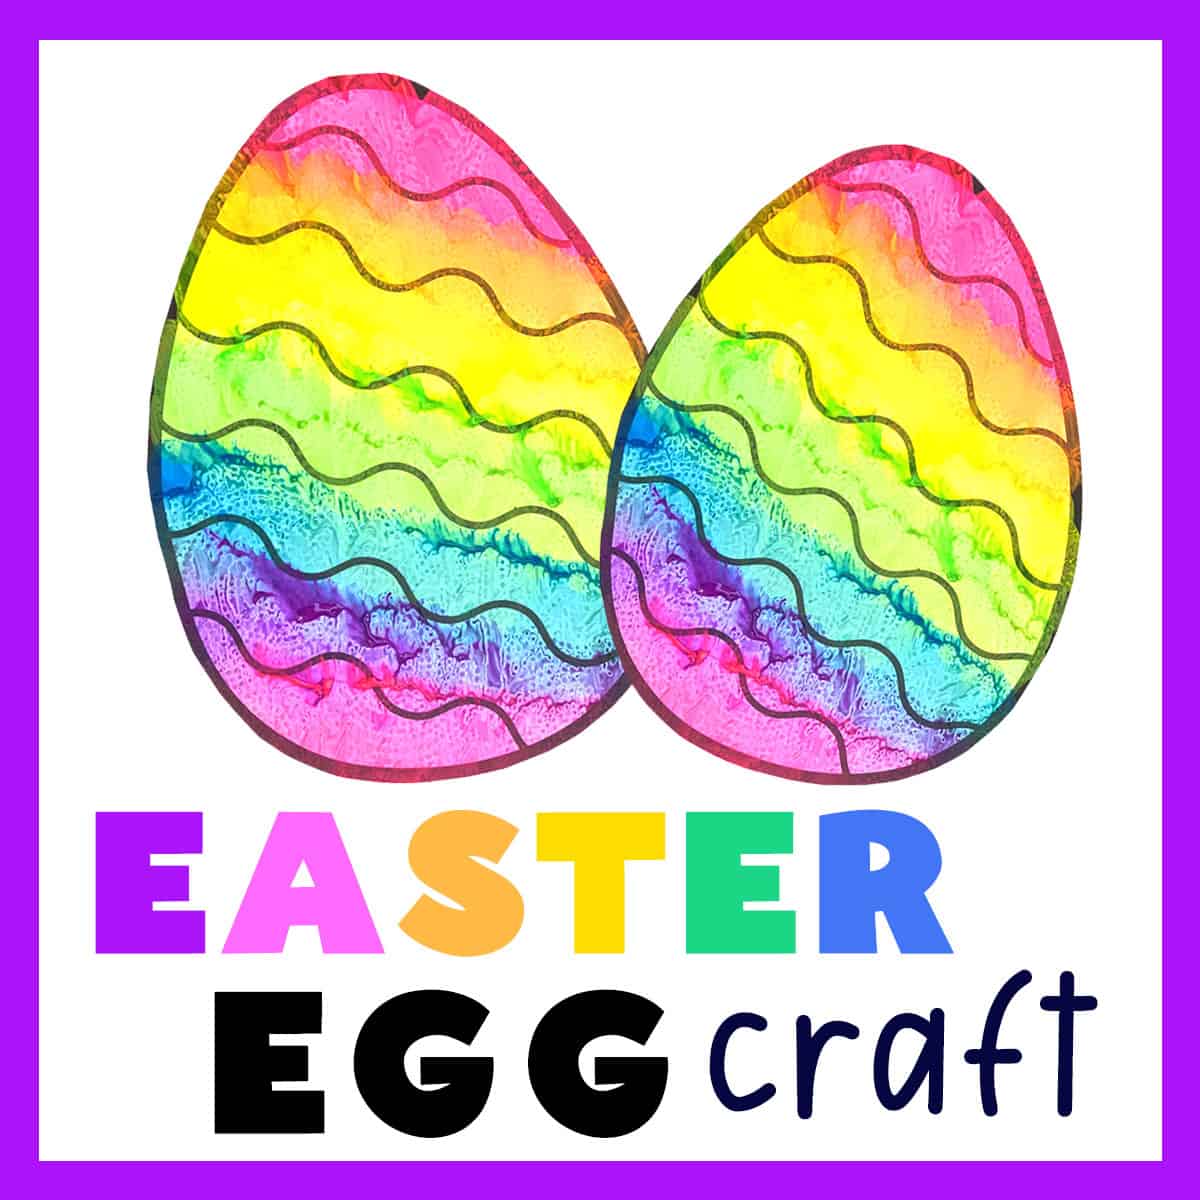 Easter Coloring: One Stamp, Three Coloring Techniques. - Crafty